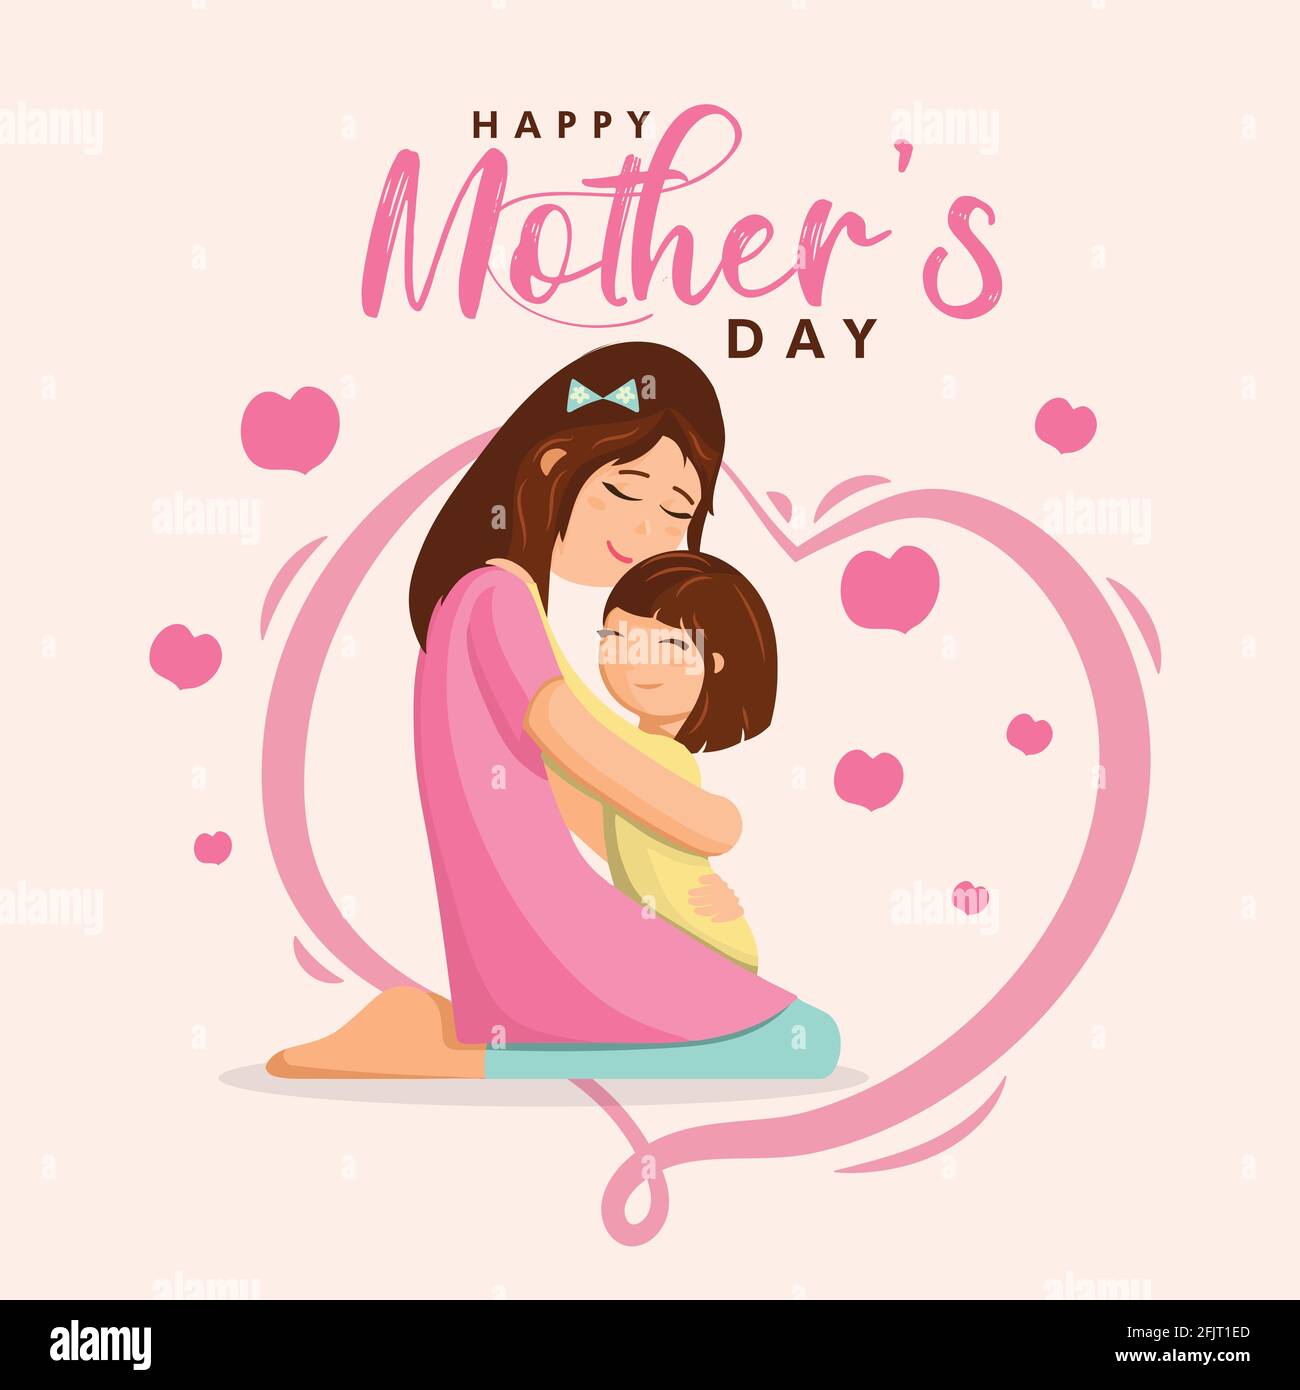 Happy Mother's Day poster, Mom and child love illustration ...